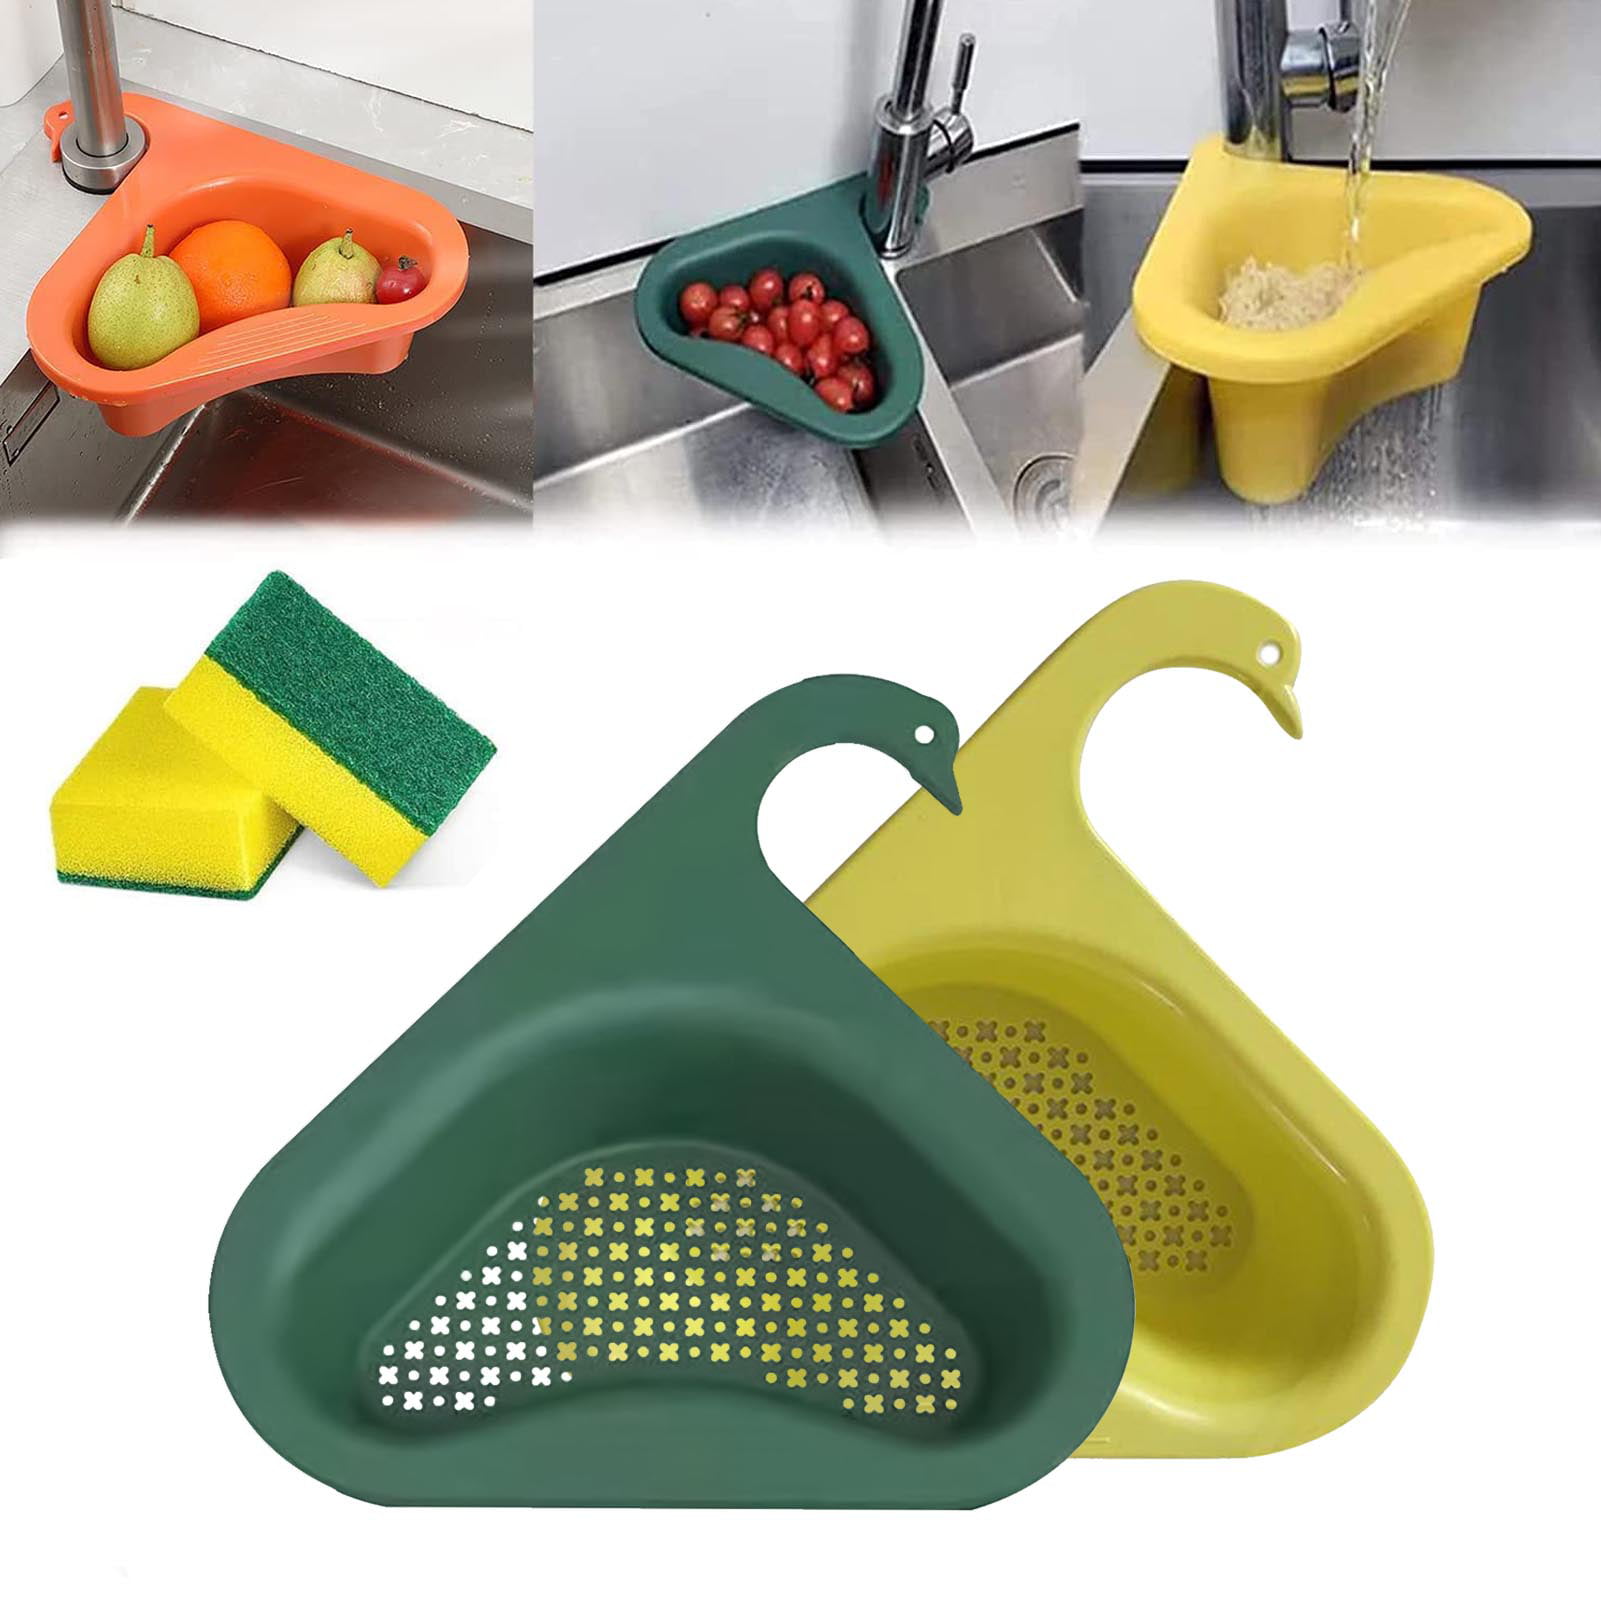 4.5'' Plastic Kitchen Sink Strainer Drain for Catching Food Particles 2 PCS 